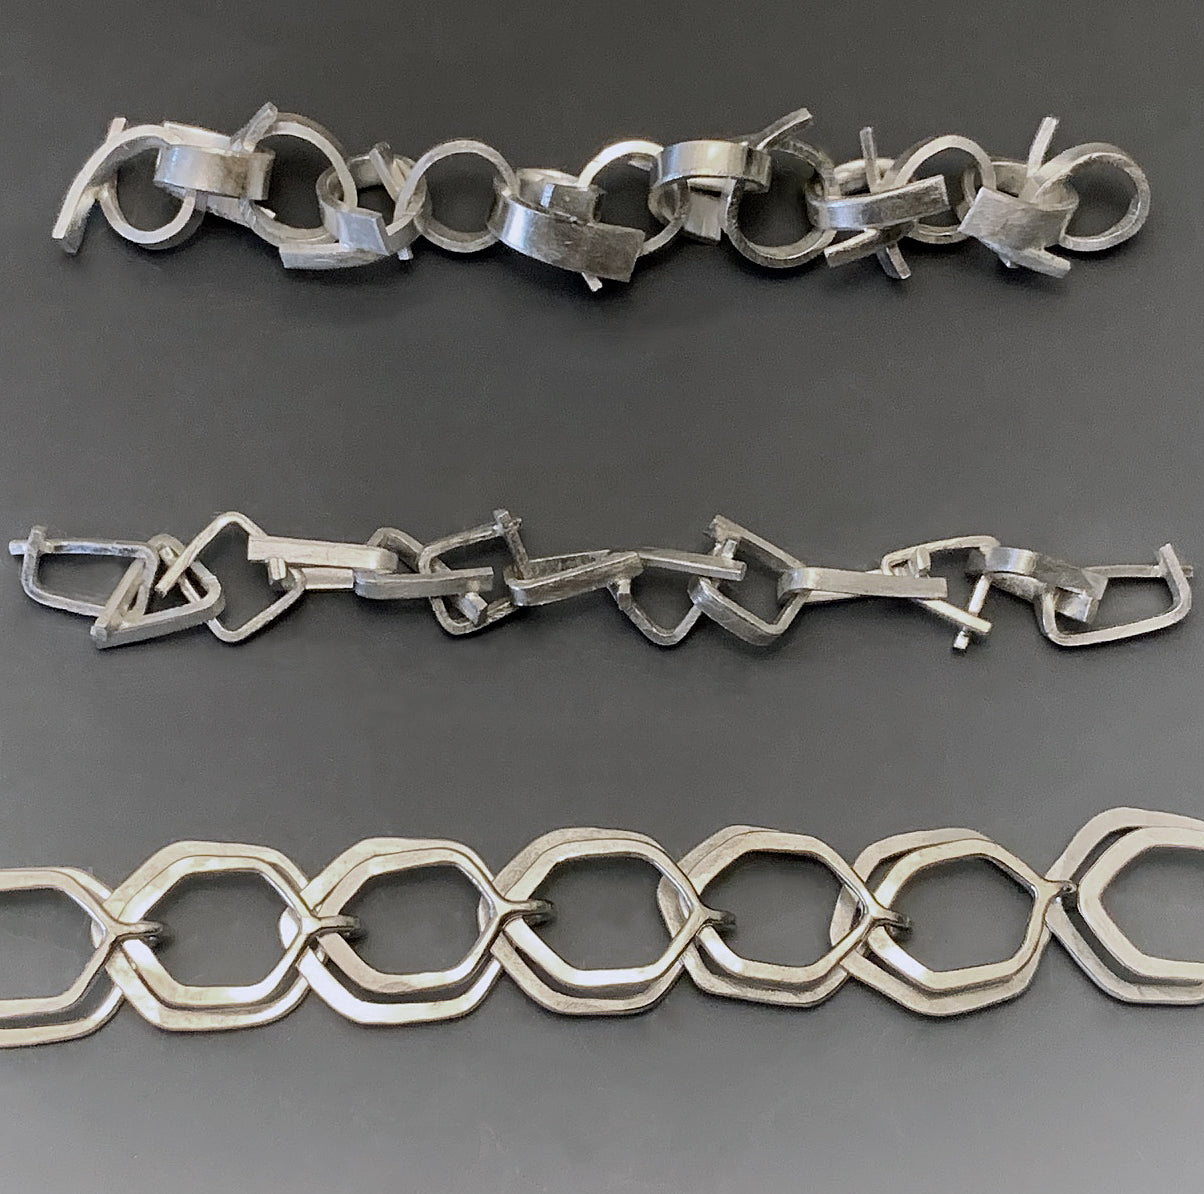 Modern silver chain samples by Suzanne Williams